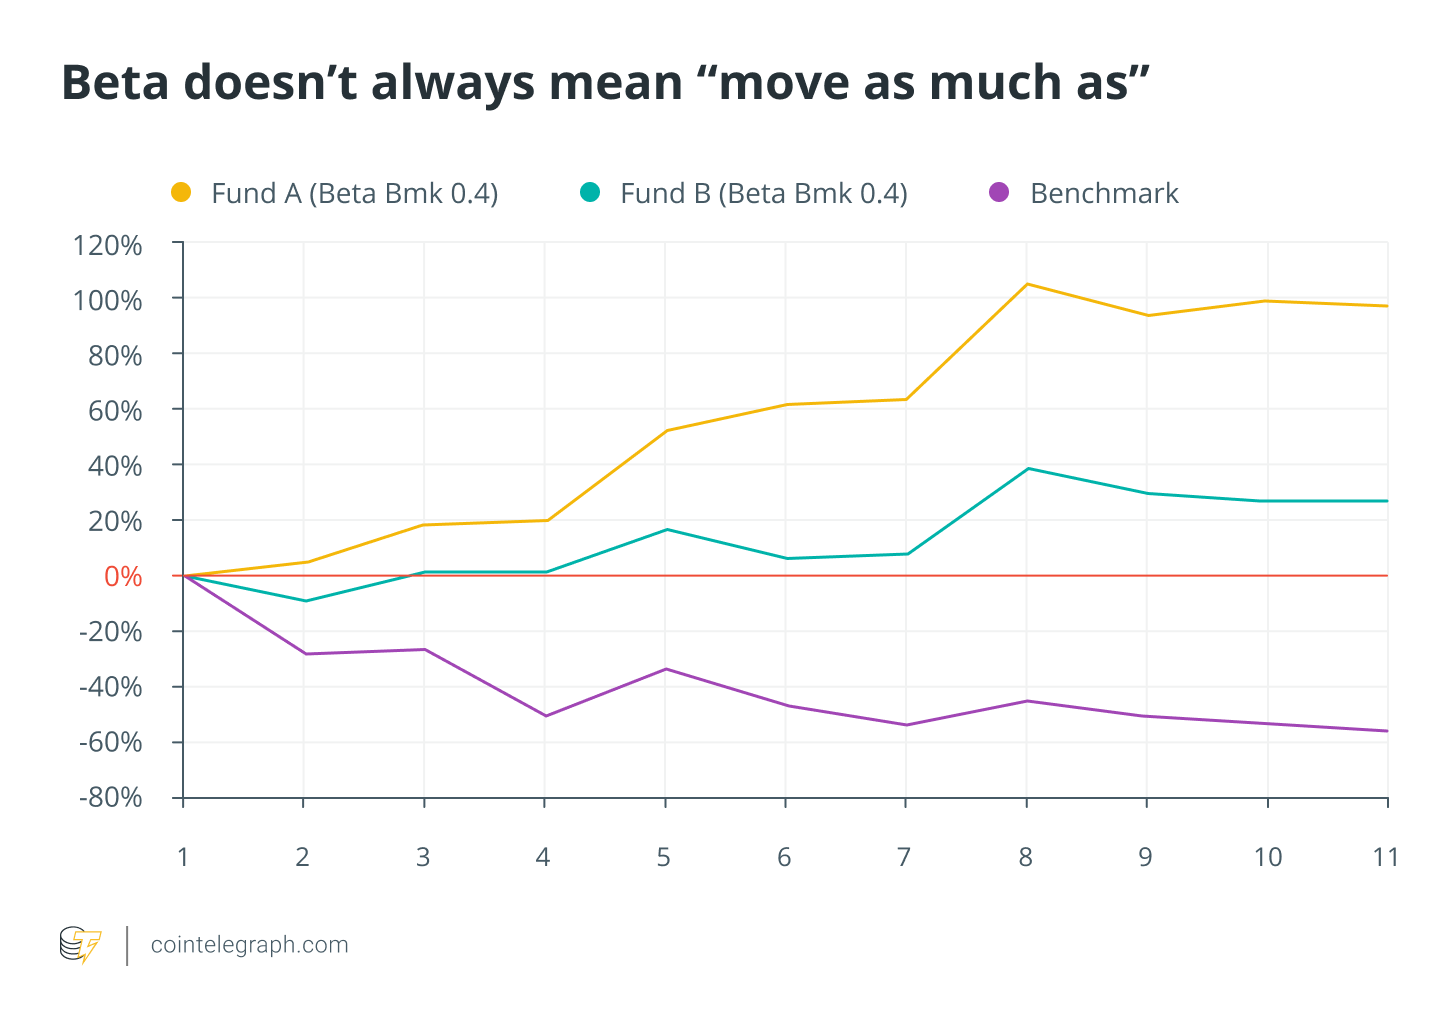 Beta doesn’t always mean "move as much as"